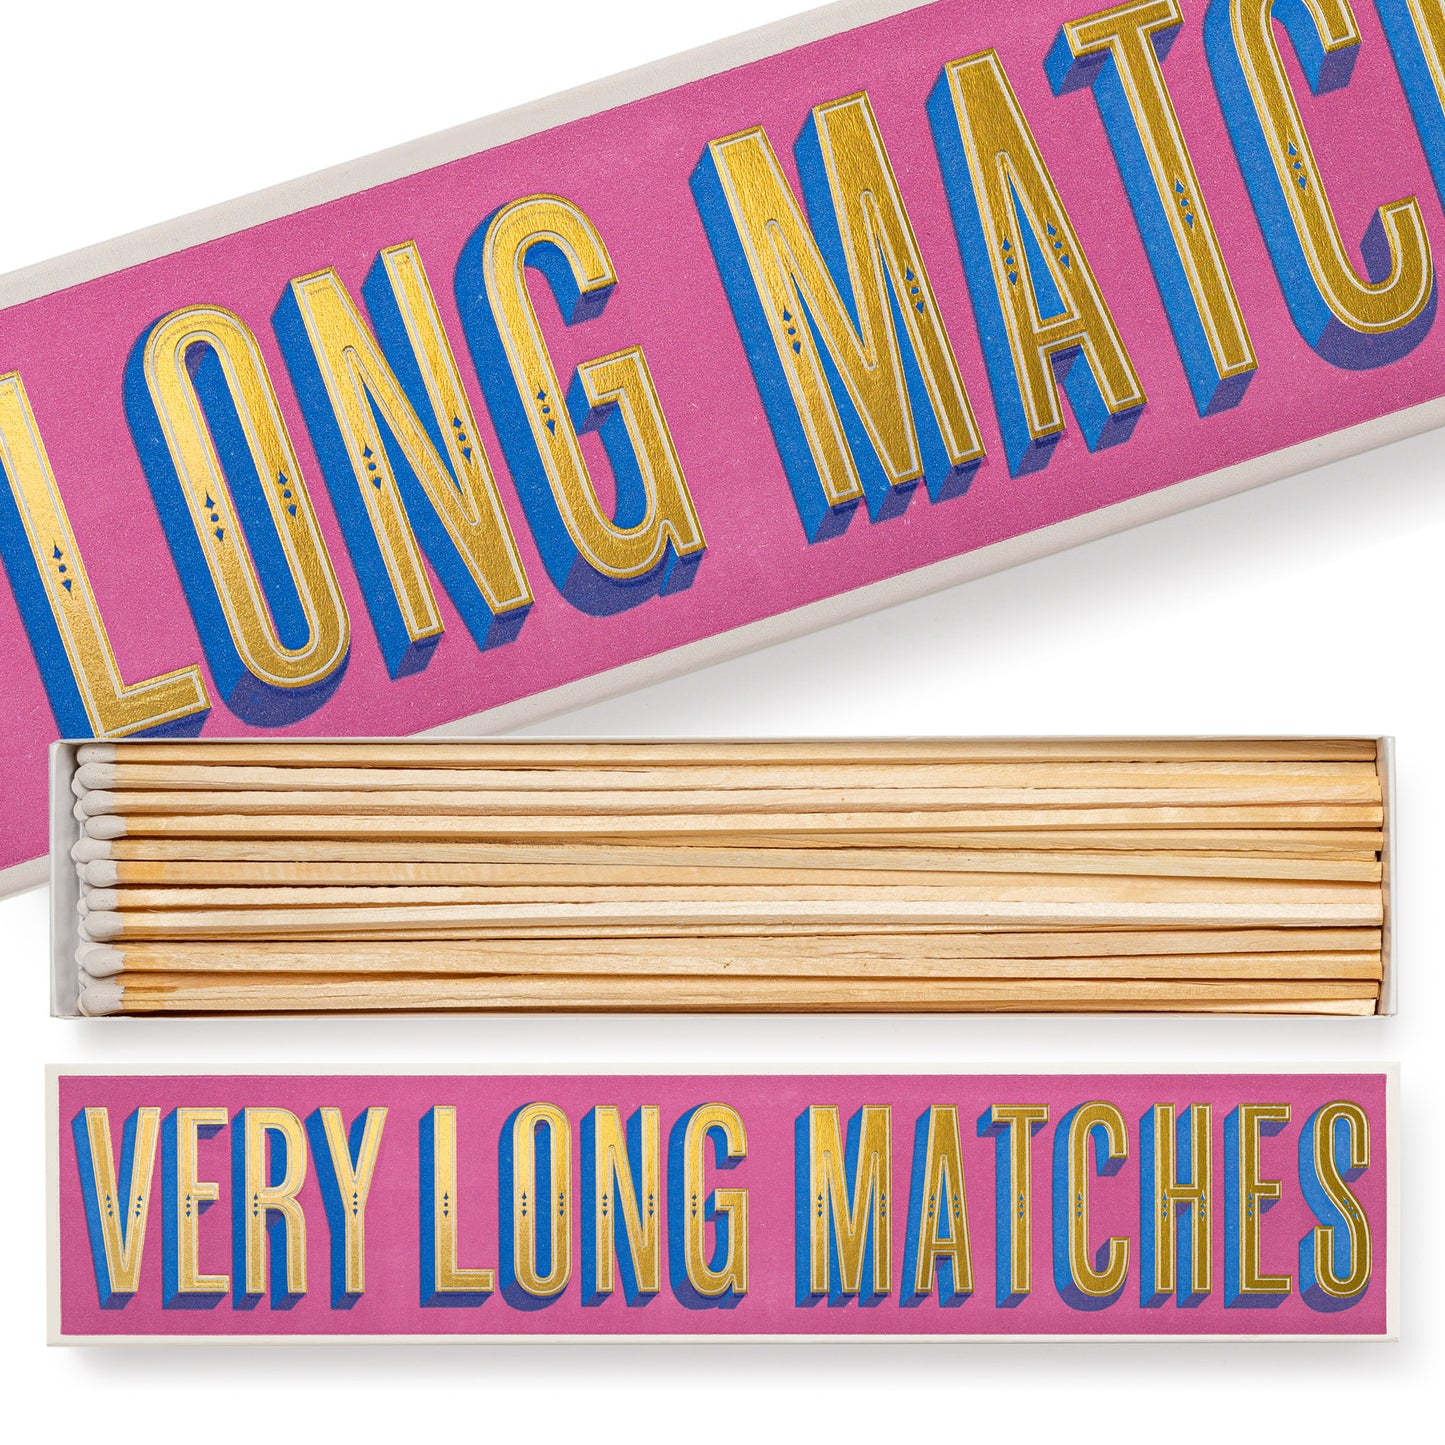 Long Boxed Matches - Very Long Matches!